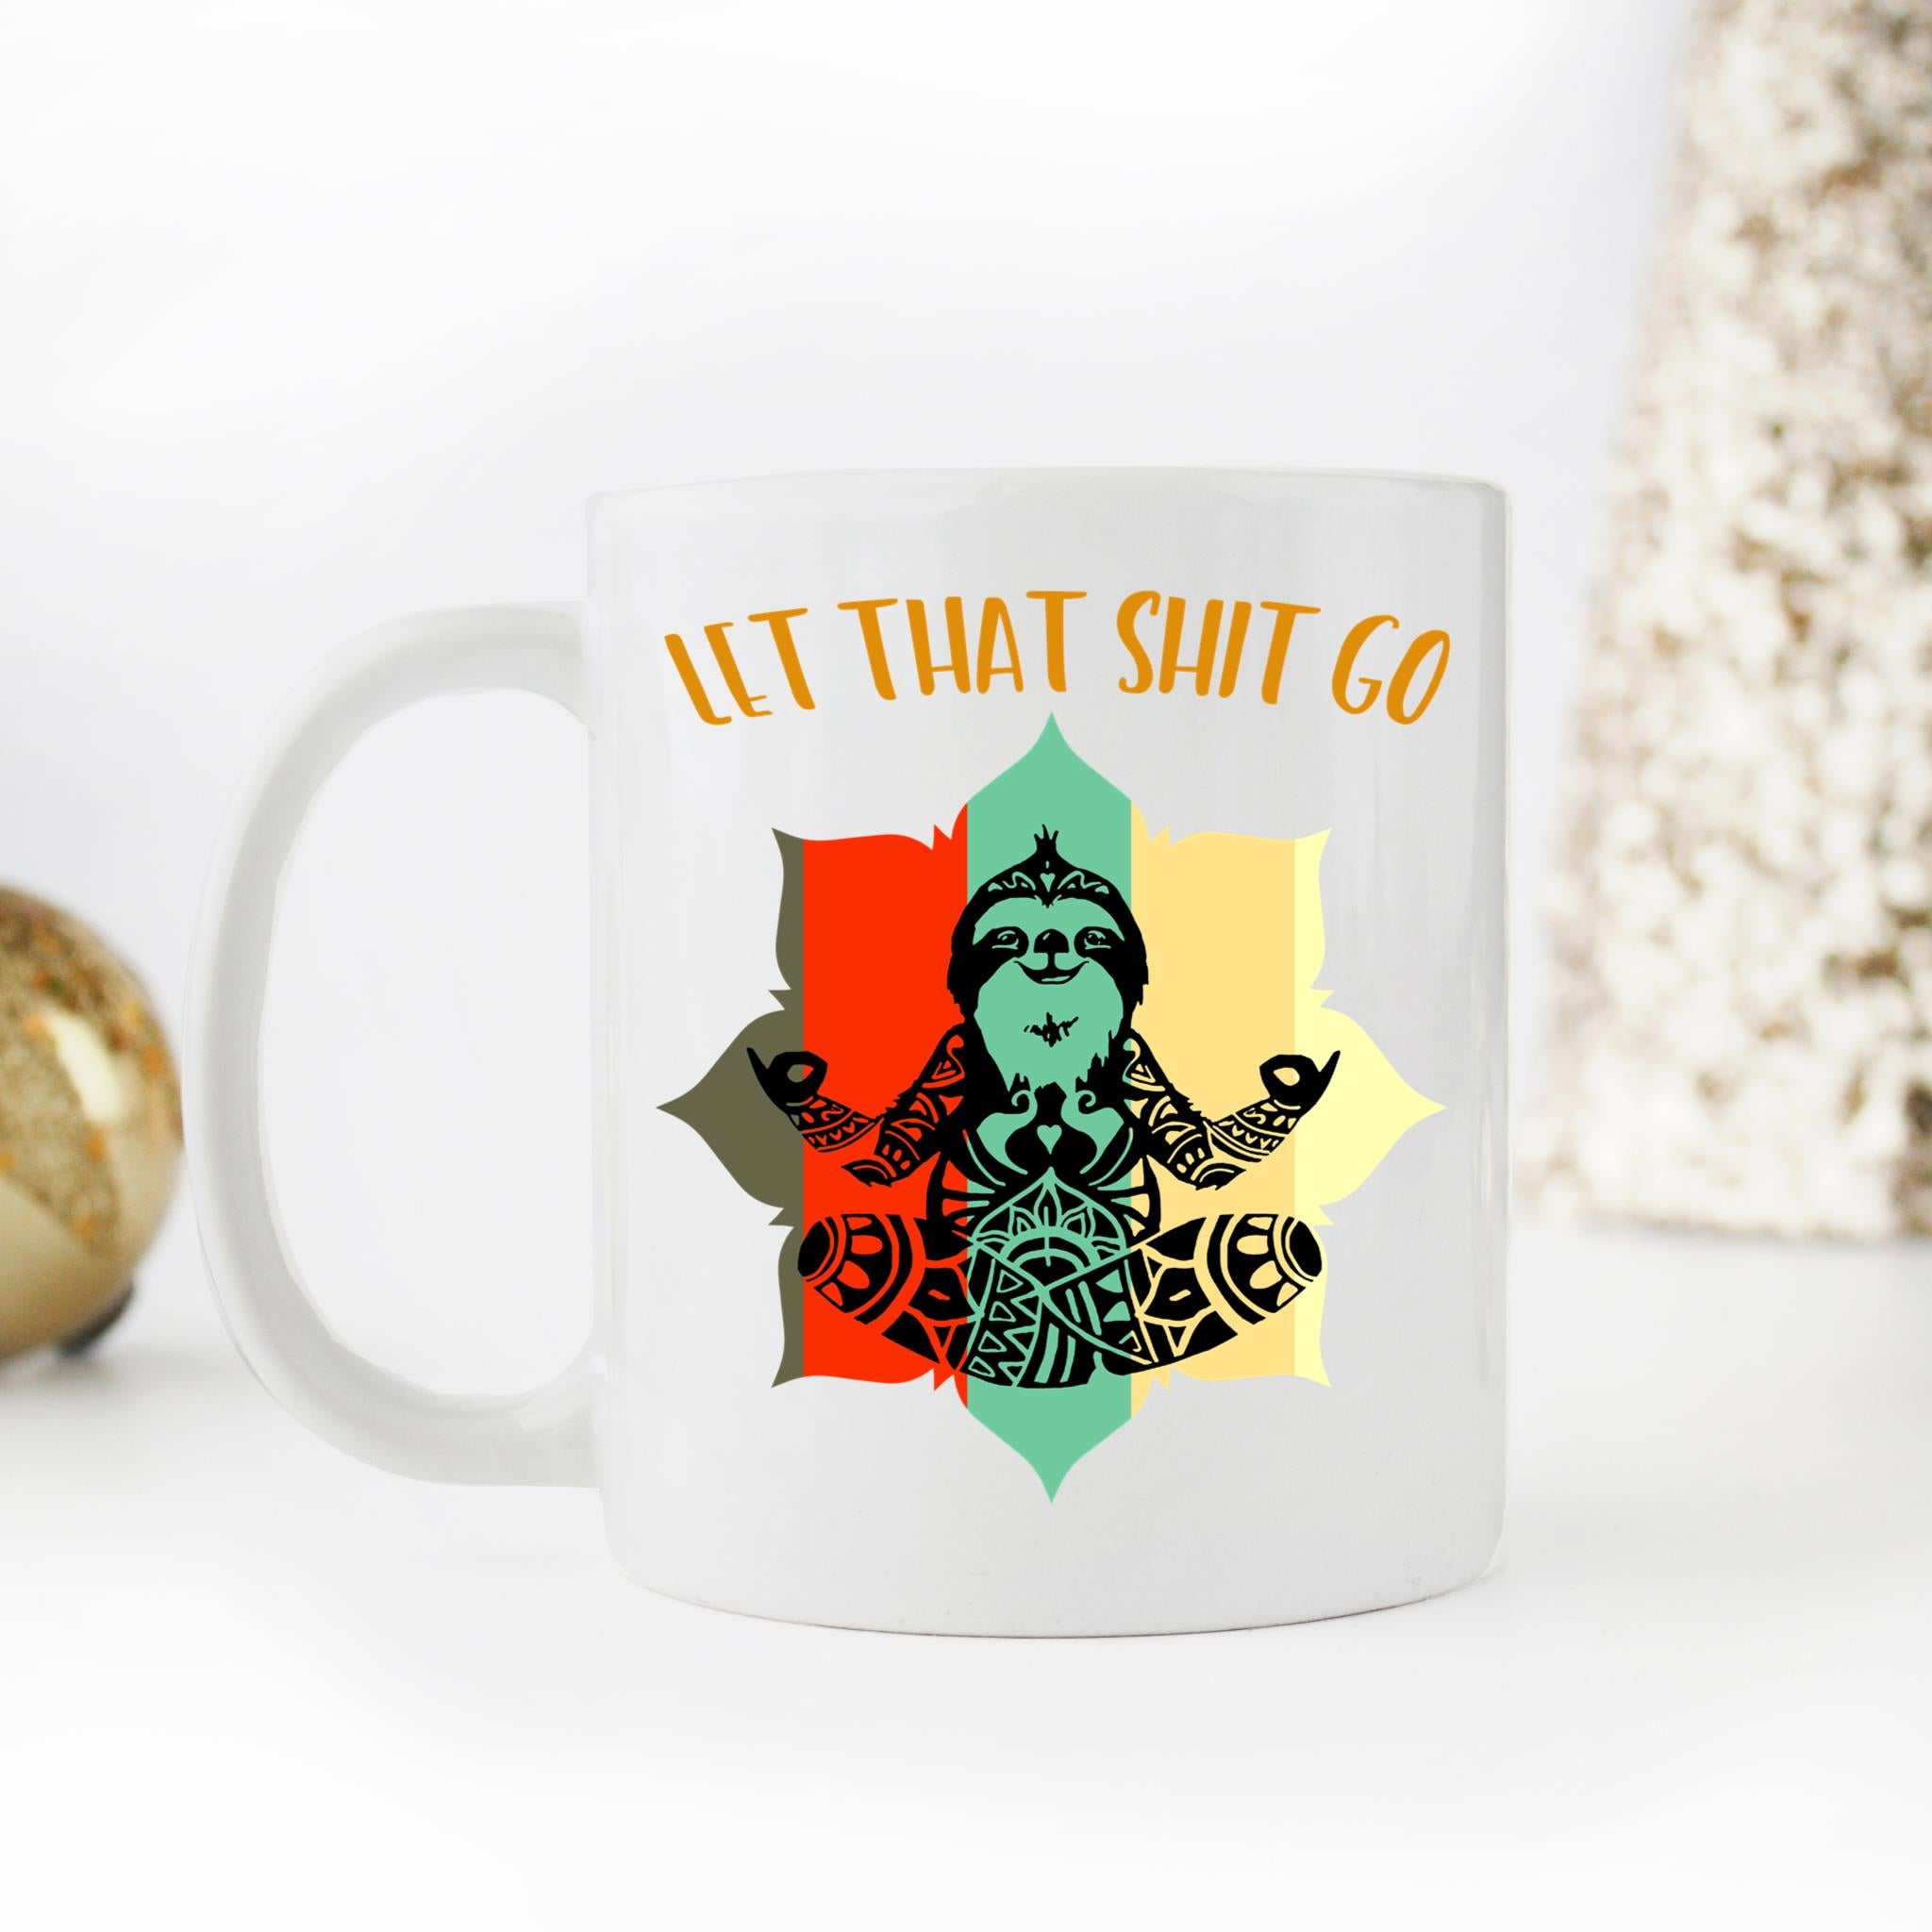 Skitongifts Funny Ceramic Coffee Mug For Birthday, Mother's Day, Father's Day, Christmas NH281121-Let That Shit Go Sloth Moljm66